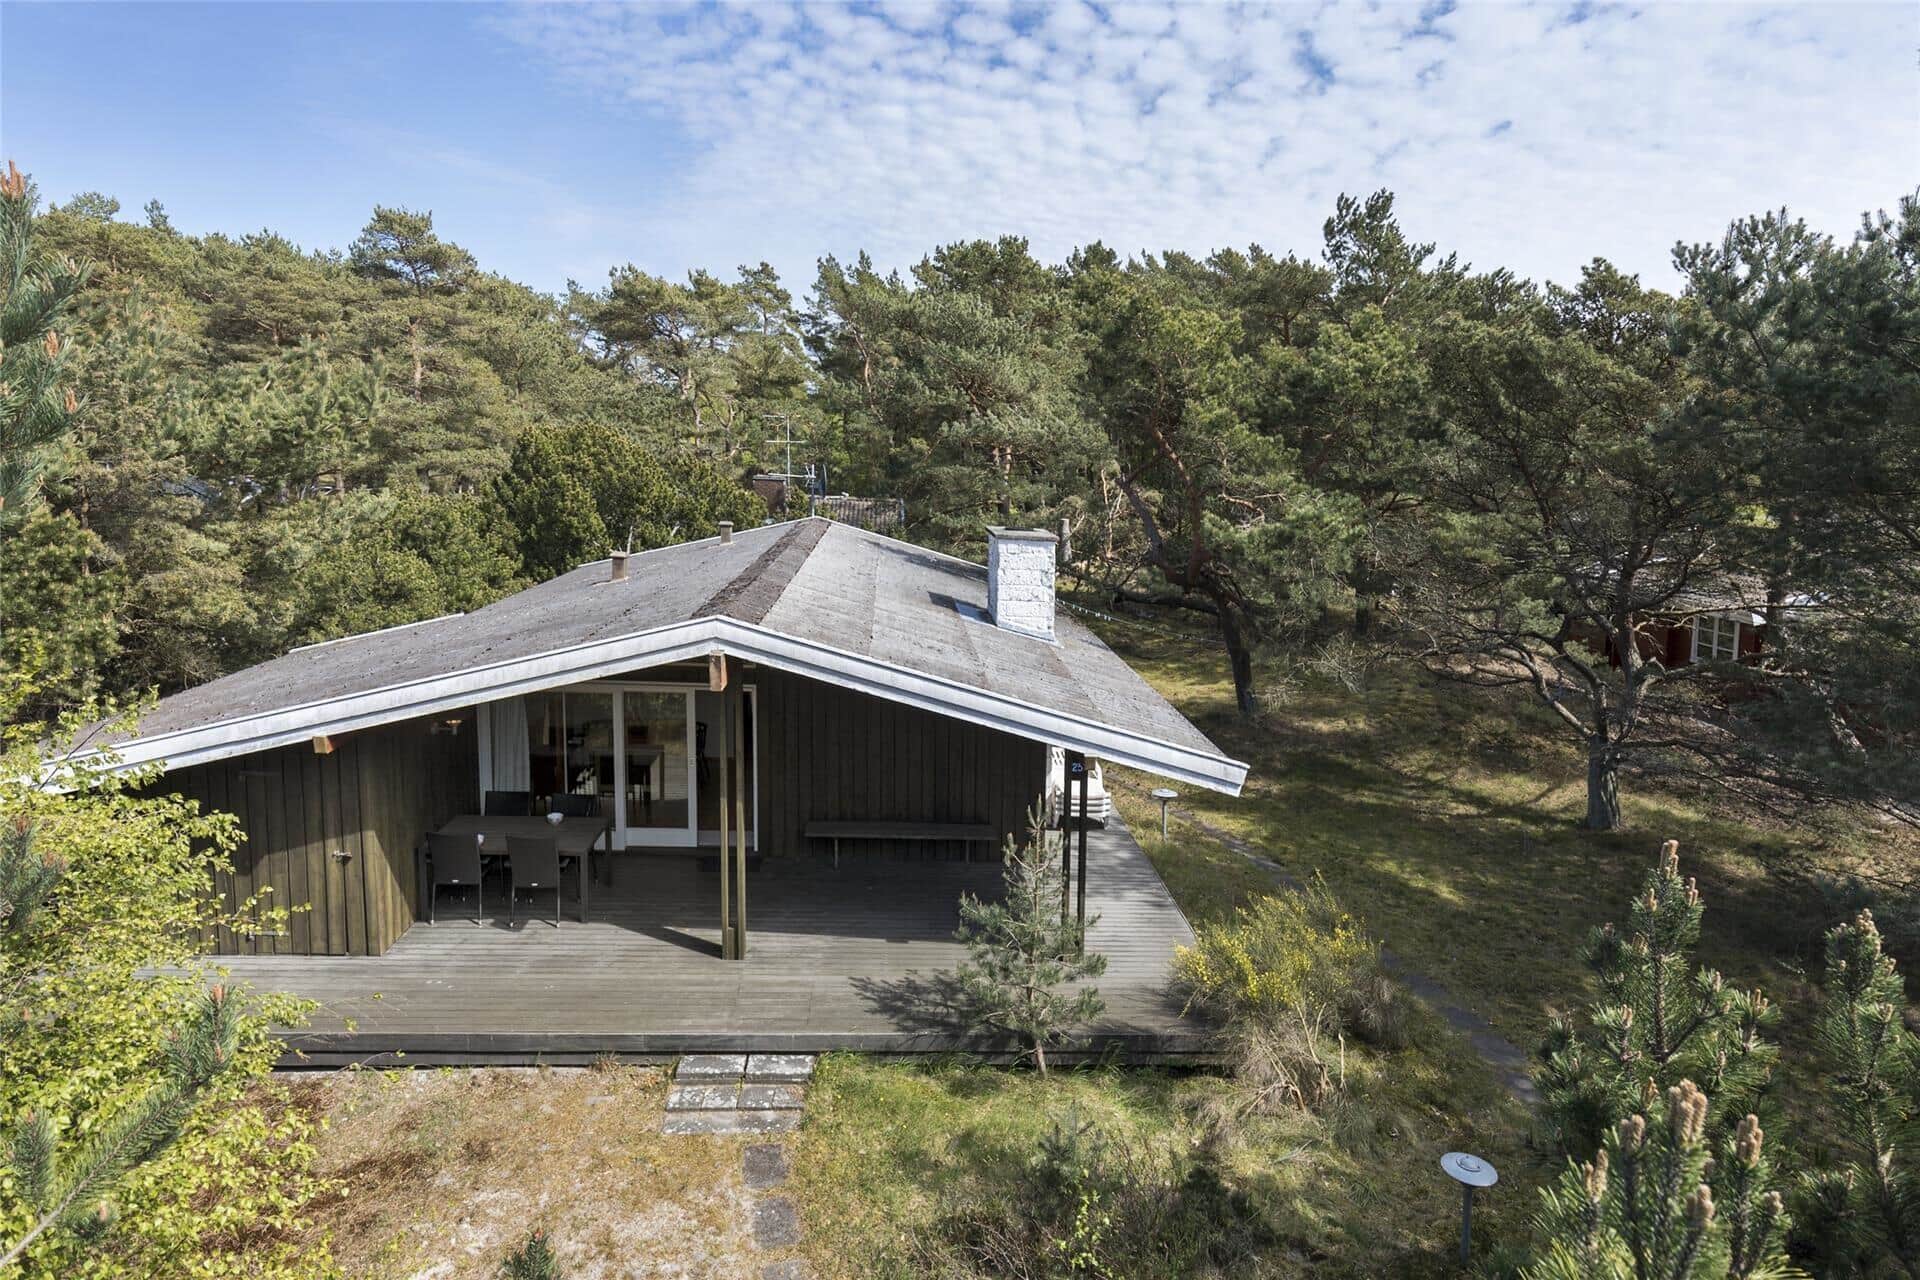 Image 0-10 Holiday-home 1541, Poserevænget 25, DK - 3720 Aakirkeby